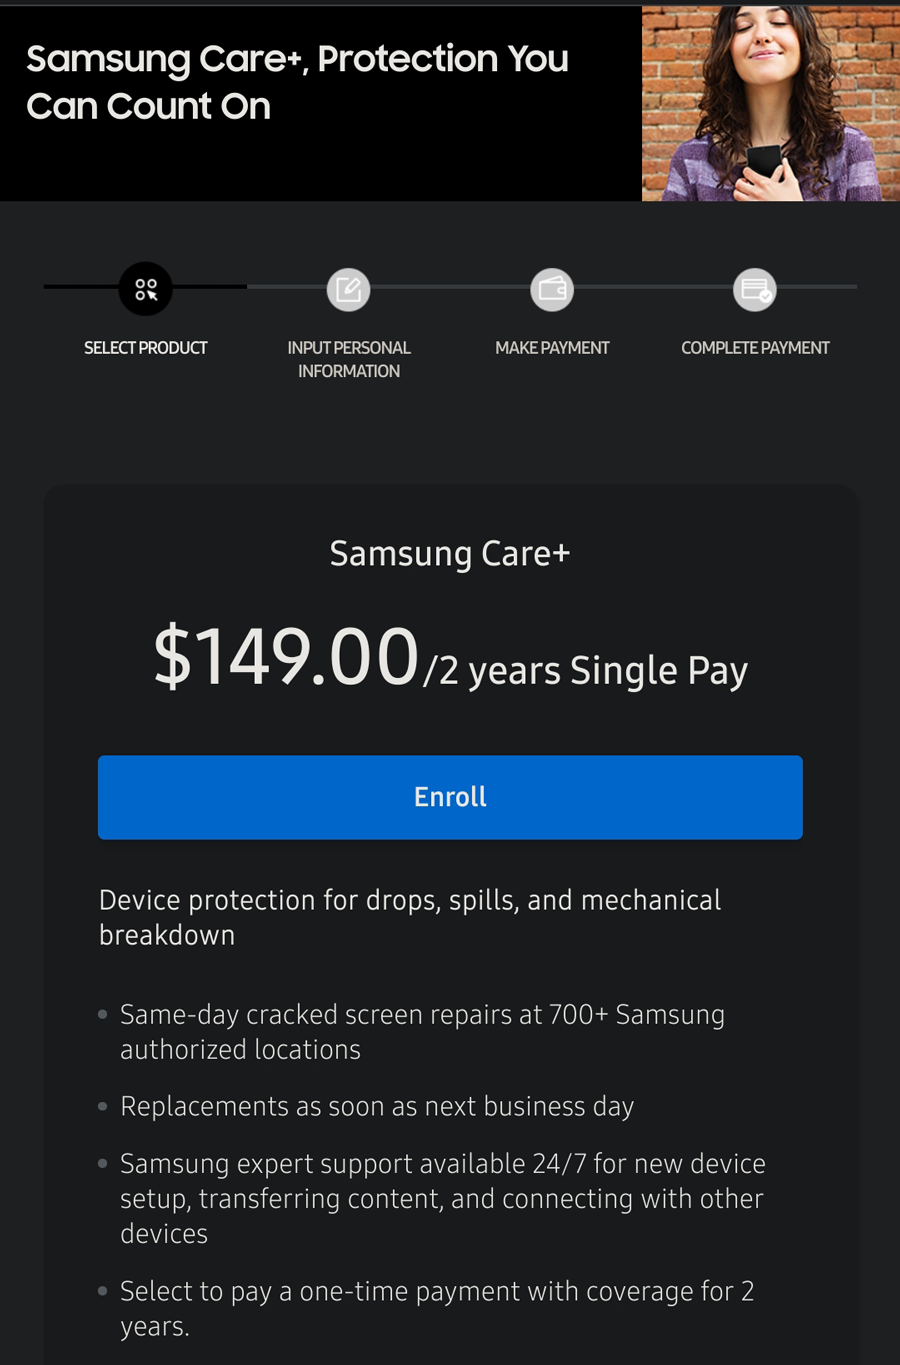 Samsung Care+ Smartphone Accidental Damage Coverage $6.25 per month for two year contract. Must pay $150.00 up front. Can cancel anytime for prorated refund.